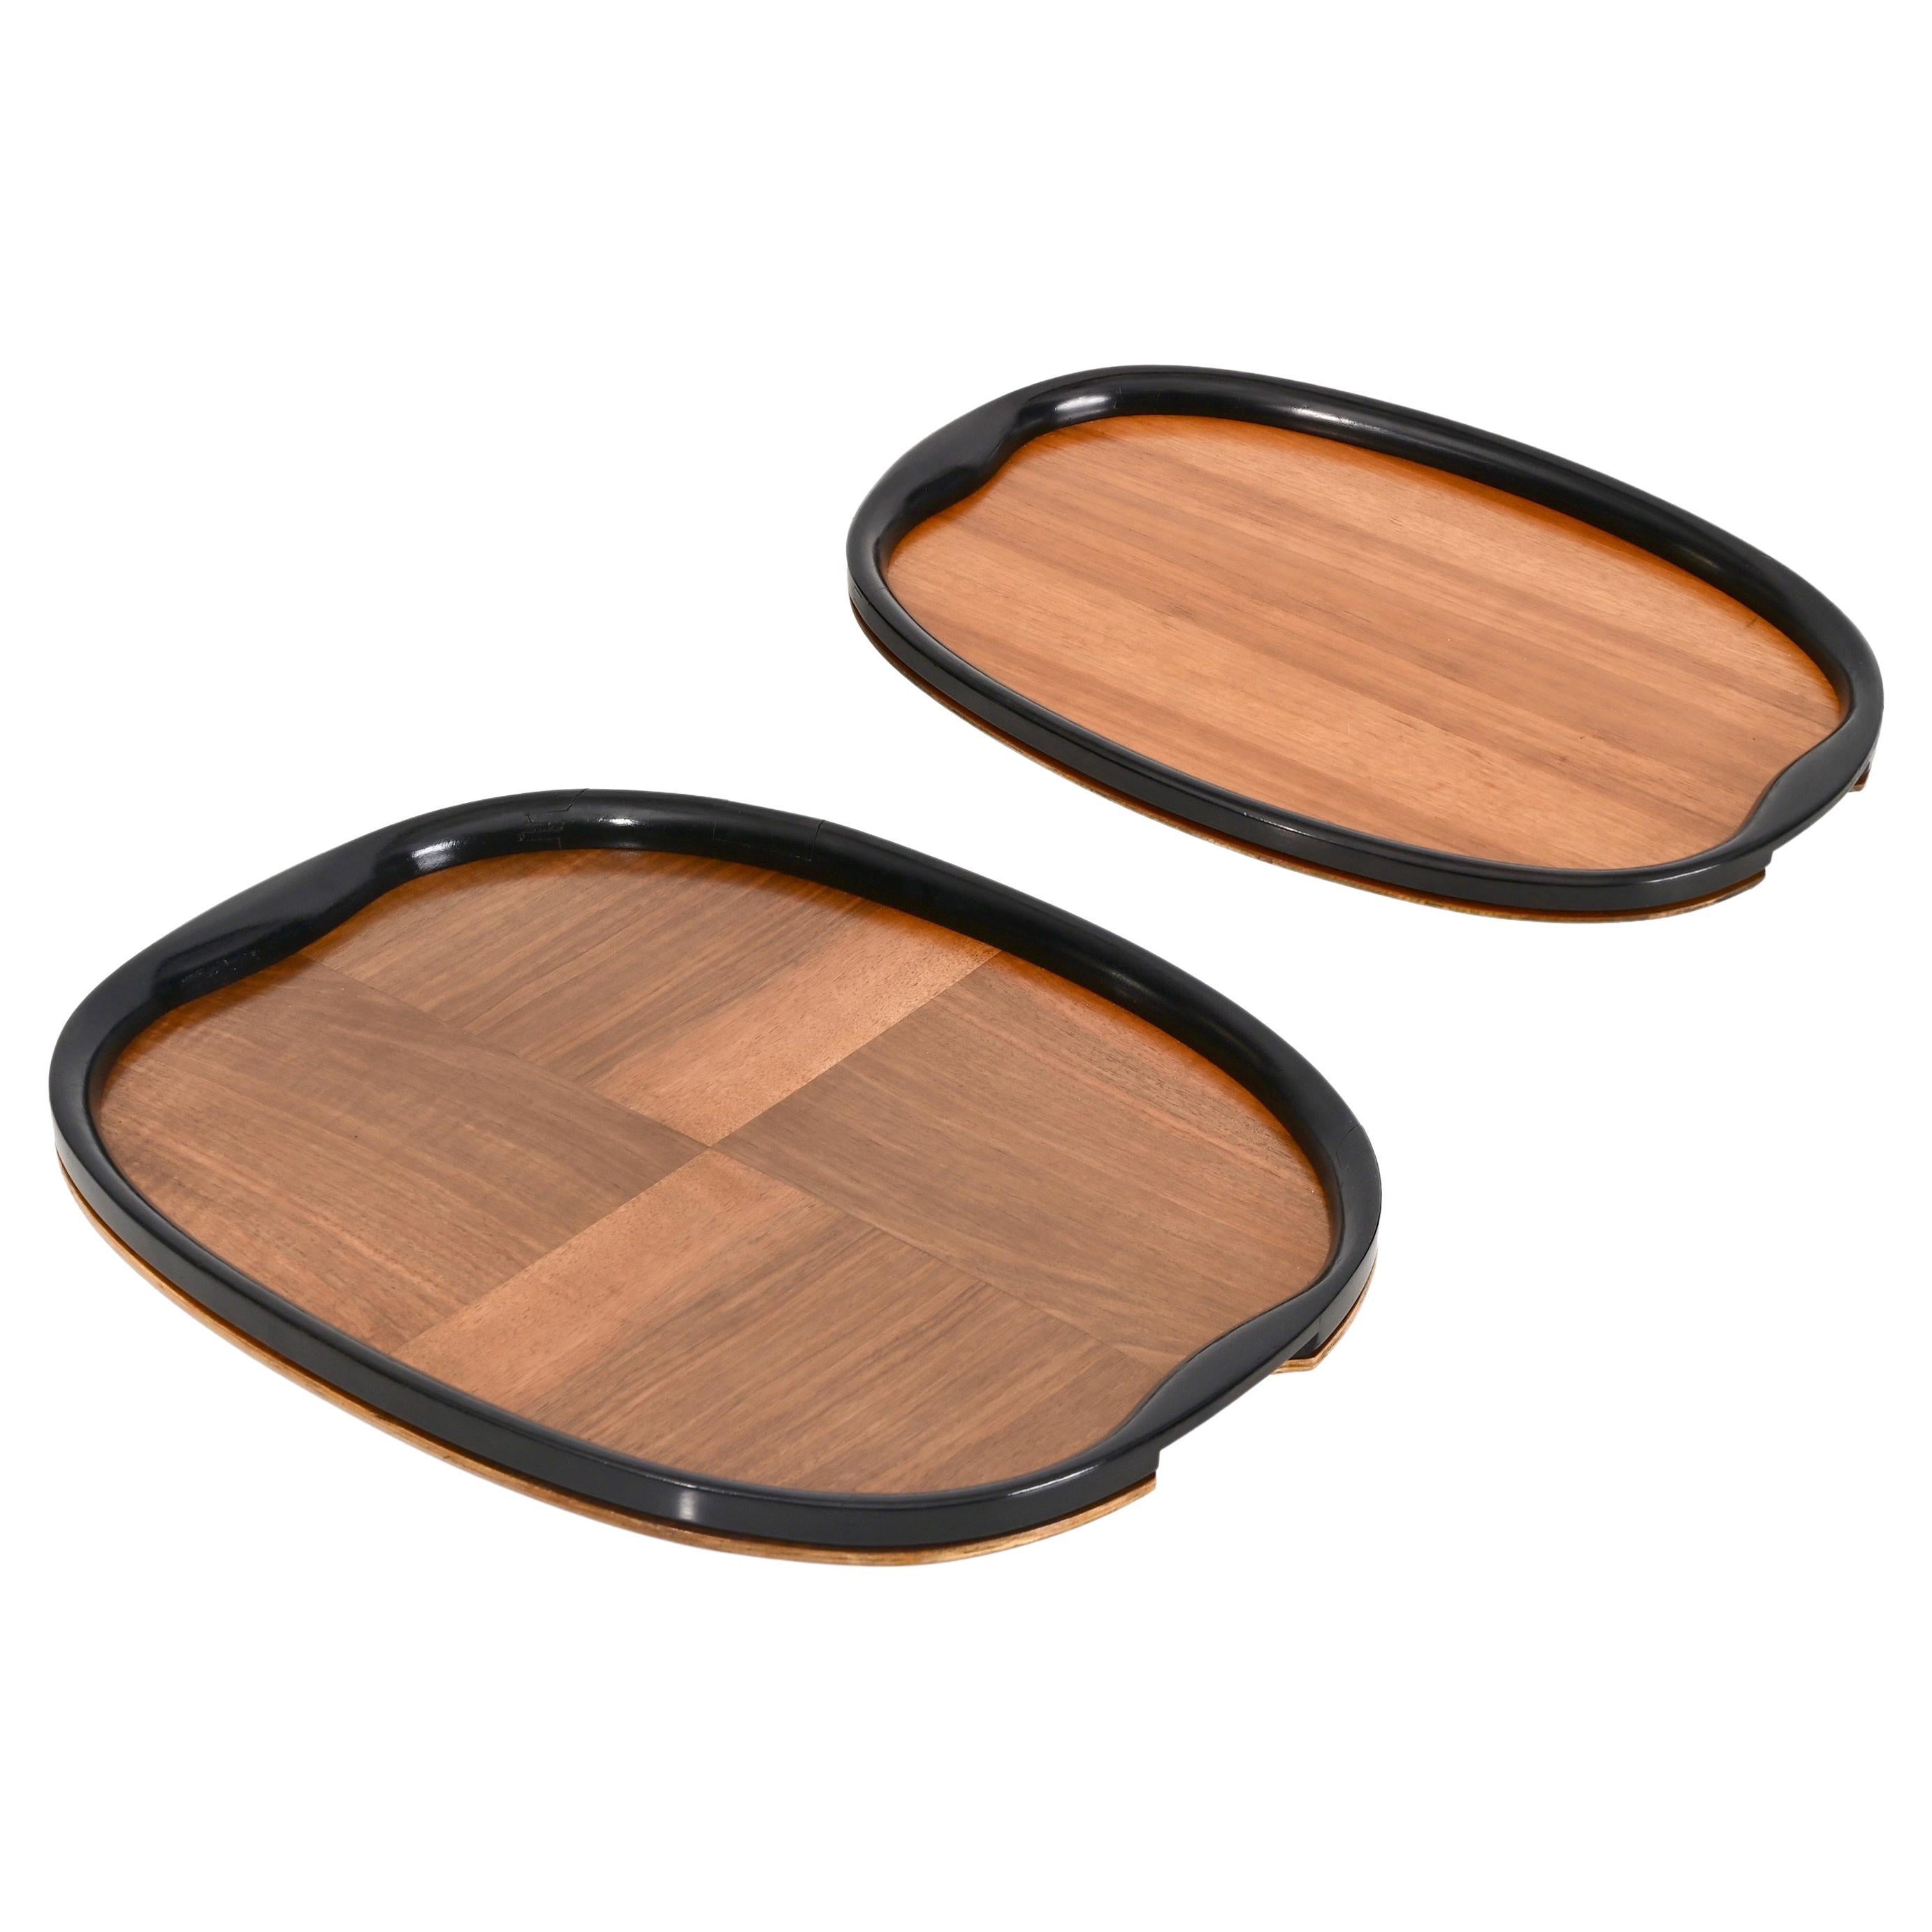 Pair of Art Deco Serving Trays, Ebonized Wood and Walnut, Italy, 1940s For Sale